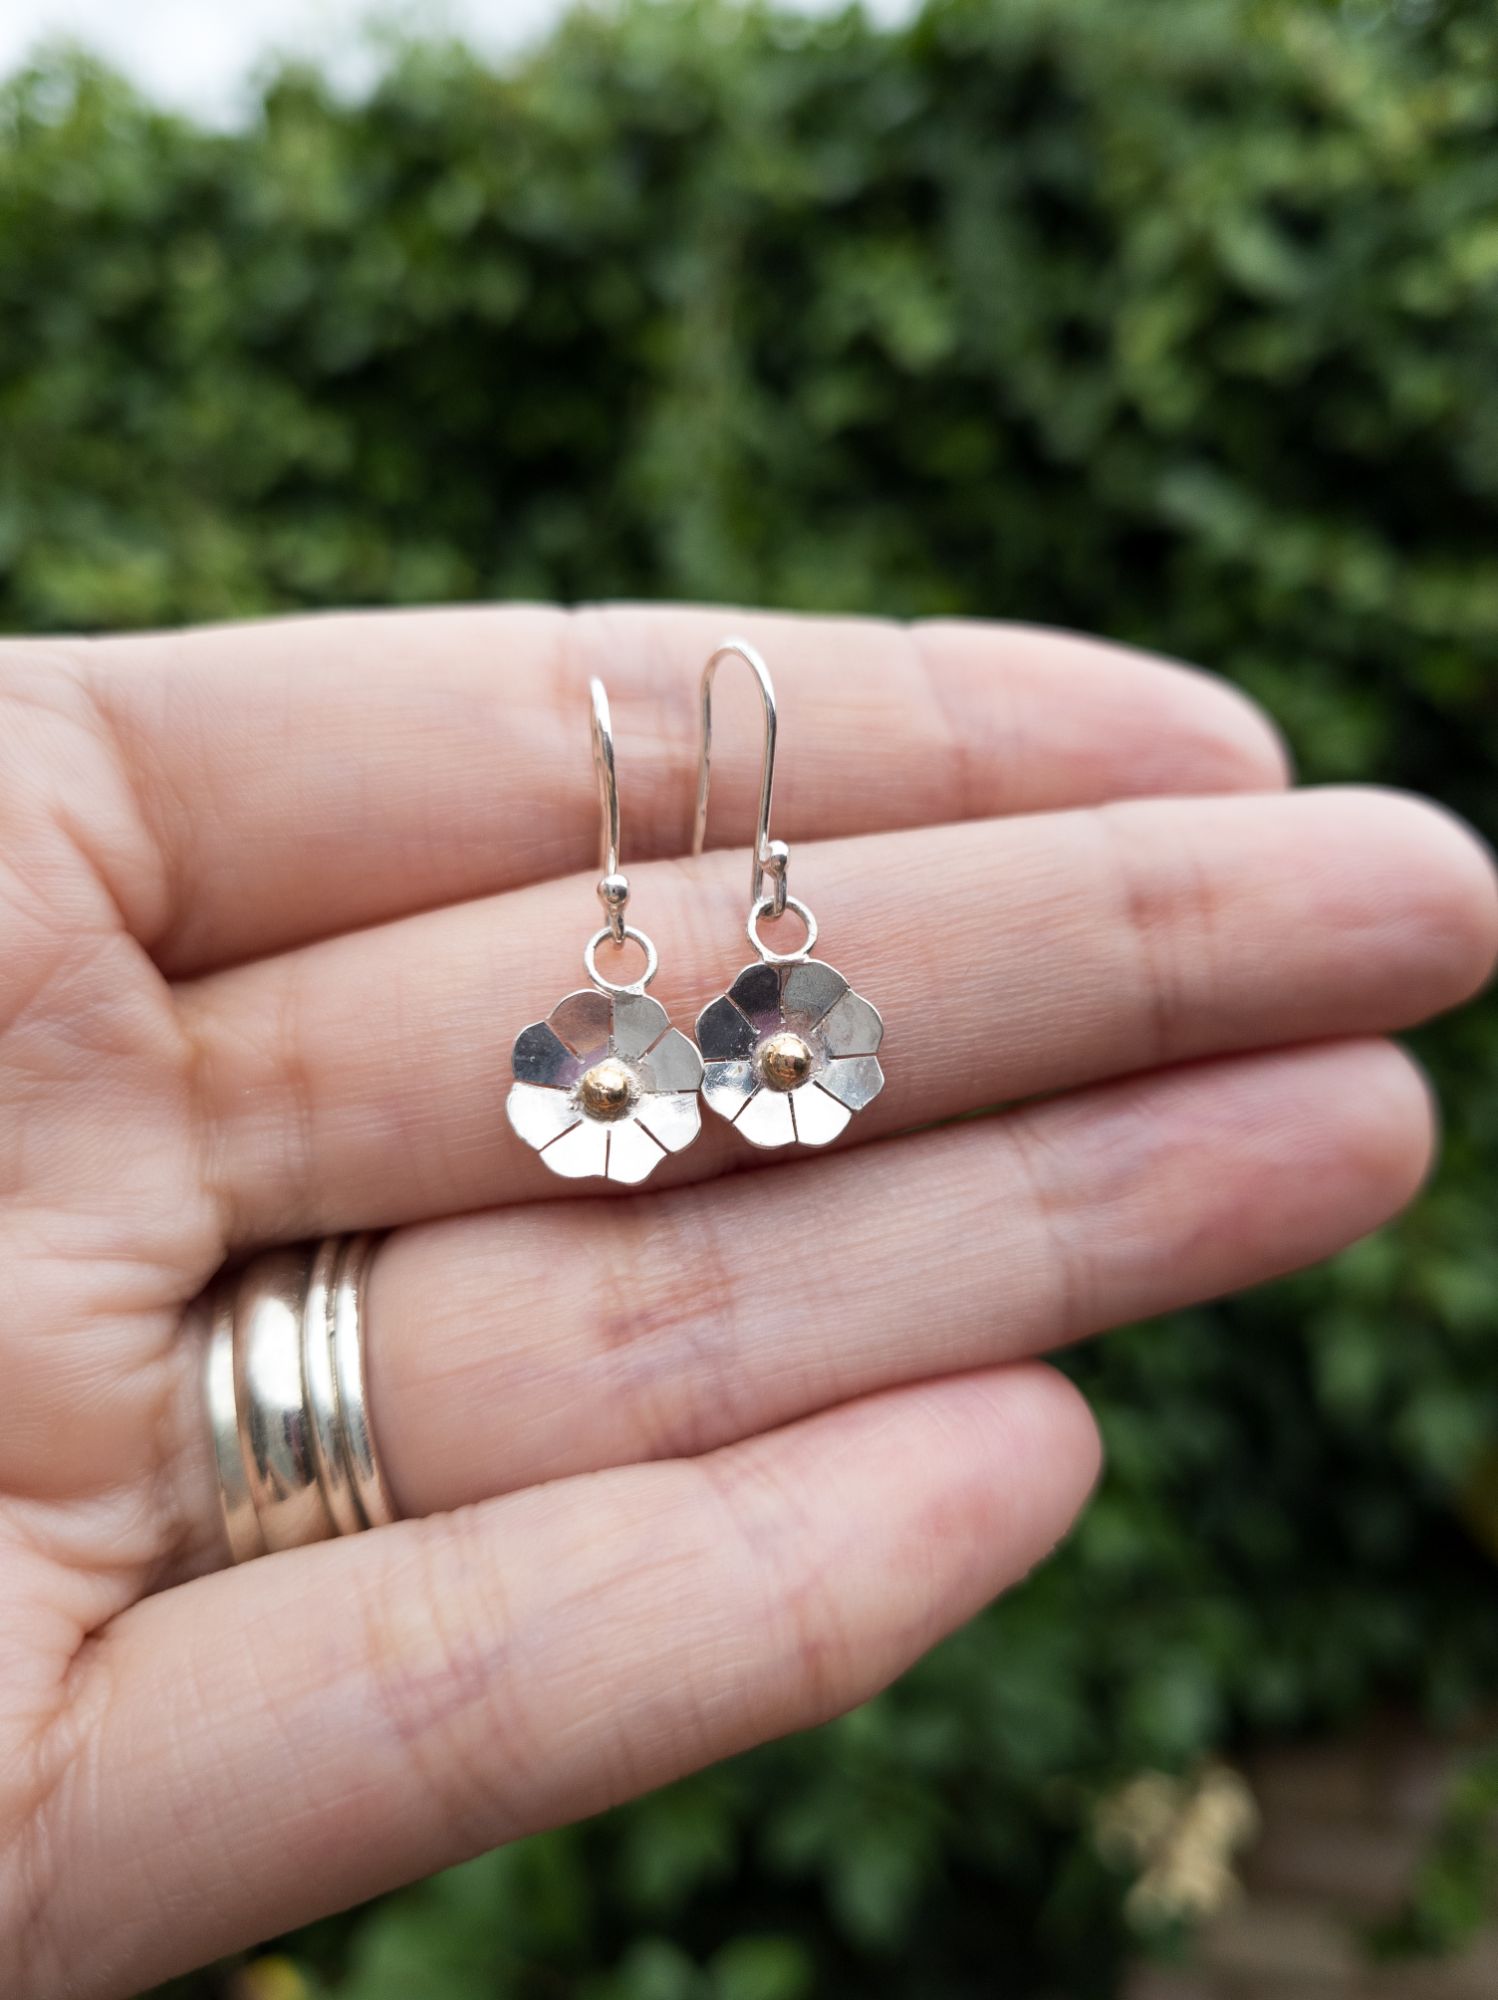 Beautiful Daisy Earrings featuring sterling silver petals and 9ct gold. The perfect pair of Summer earrings